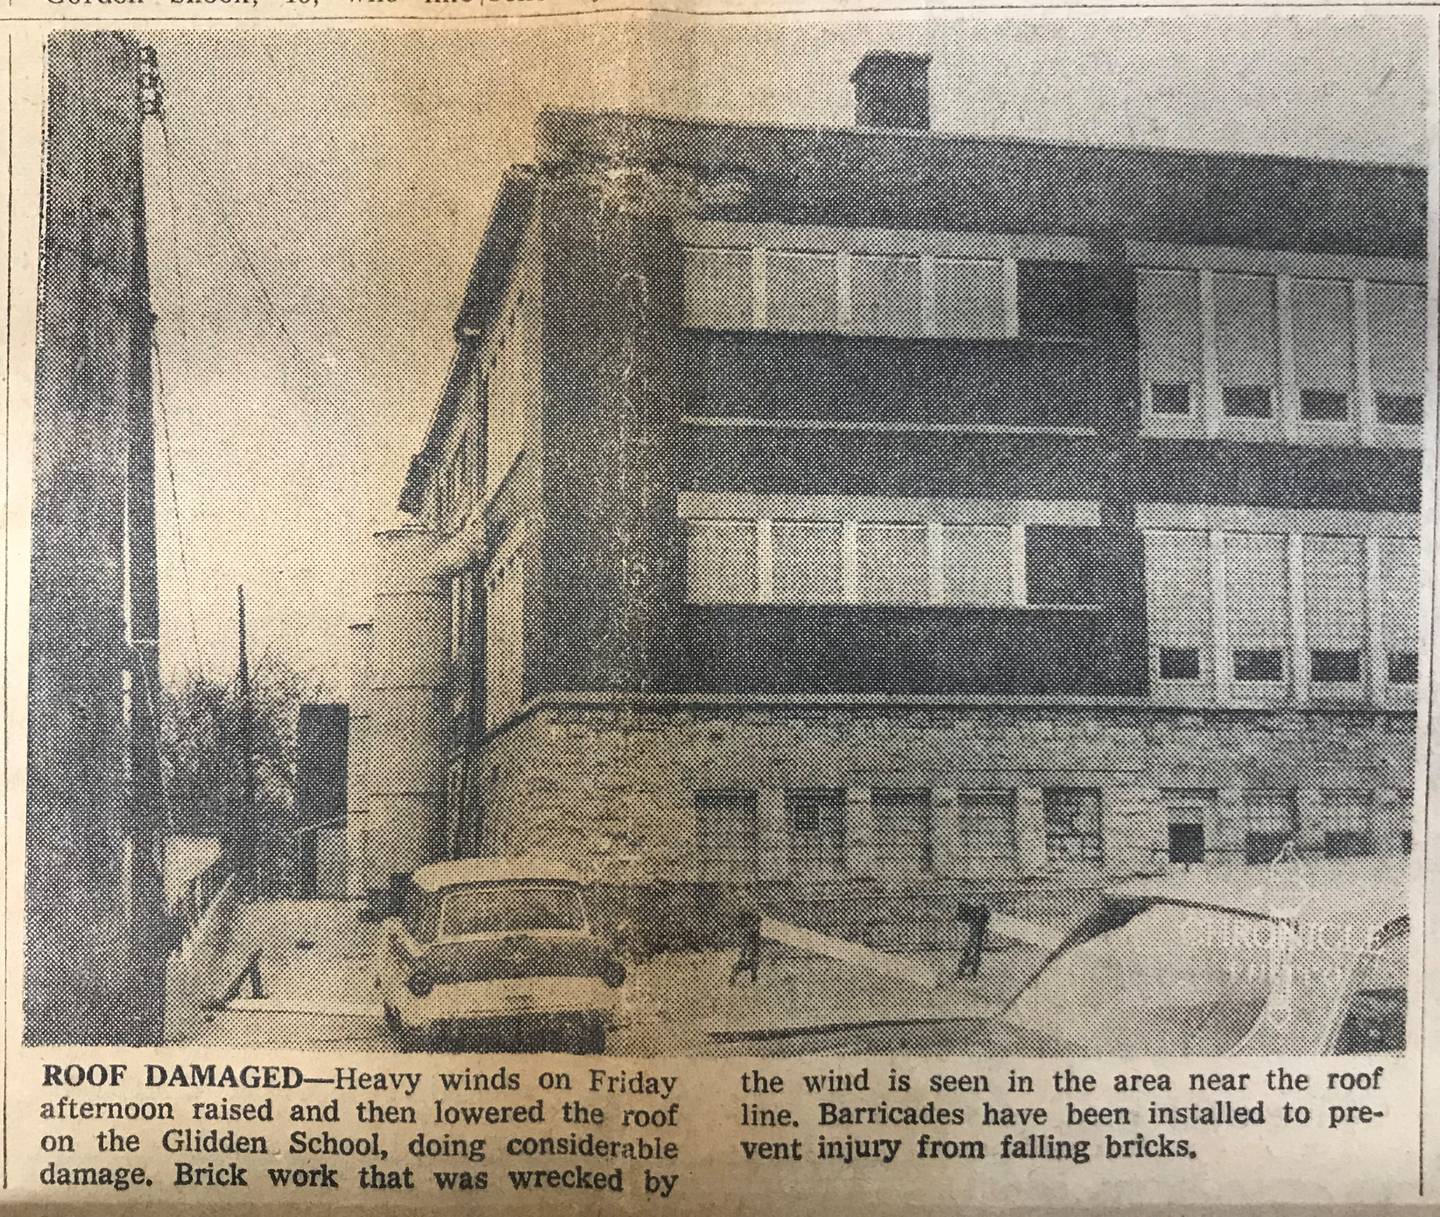 Heavy winds on Friday afternoon raised and then lowered the roof on the Glidden School, doing considerable damage. Brick work that was wrecked by the wind is seen in the area near the roof line. Barricades have been installed to prevent injury from falling bricks. From the April 22, 1967 issue of The DeKalb Daily Chronicle, provided by the DeKalb County History Center Archives.